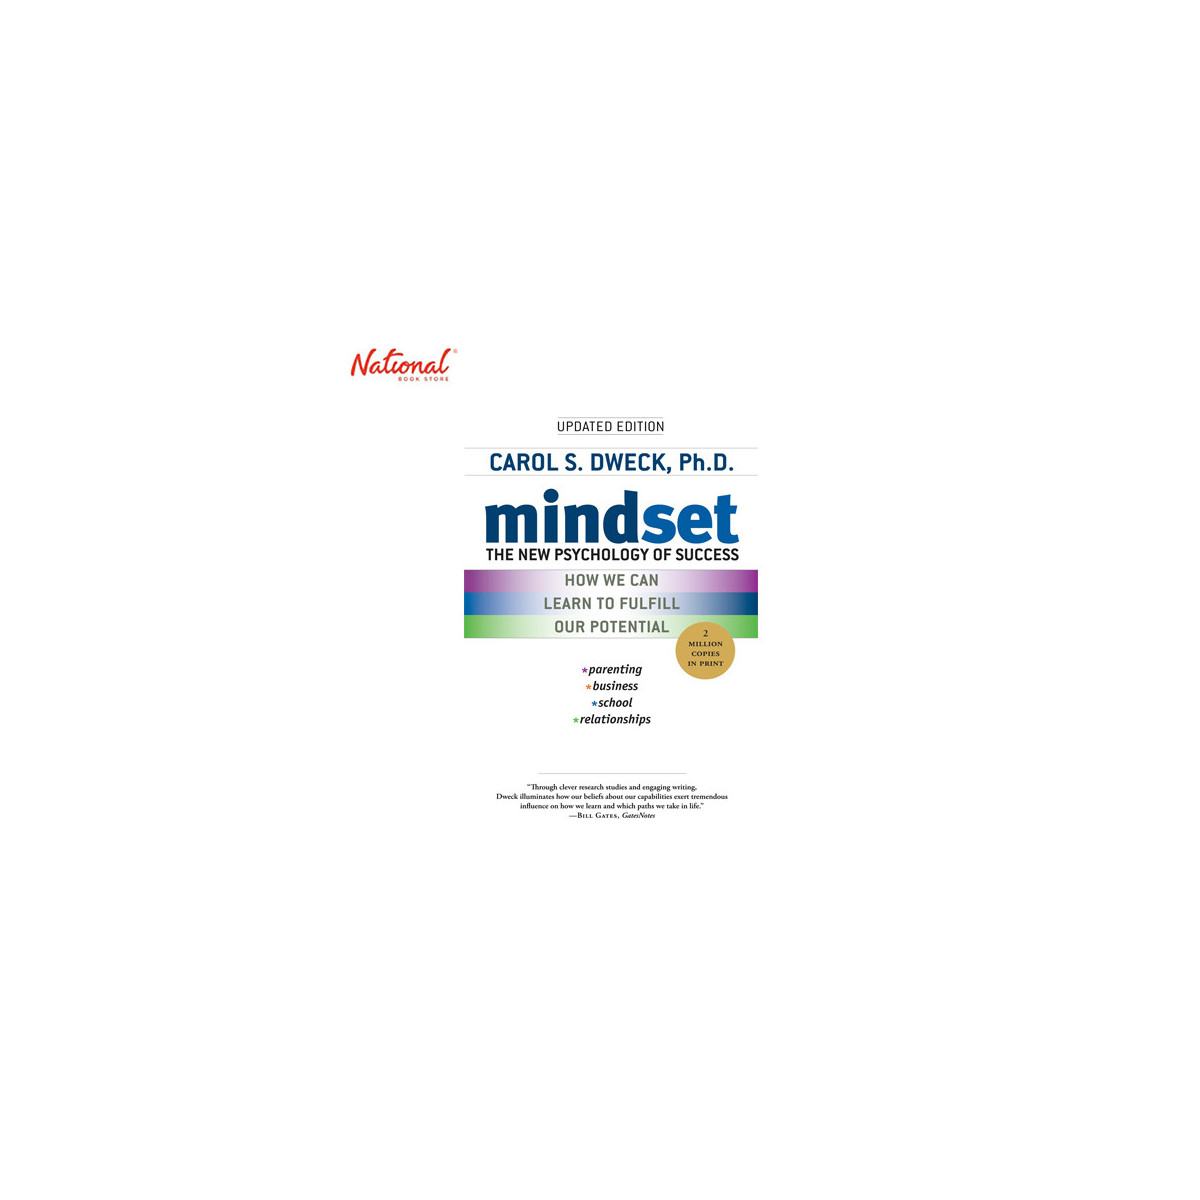 MINDSET: THE NEW PSYCHOLOGY OF SUCCESS: HOW WE CAN LEARN TO FULFILL OUR POTENTIAL TRADEPAPER